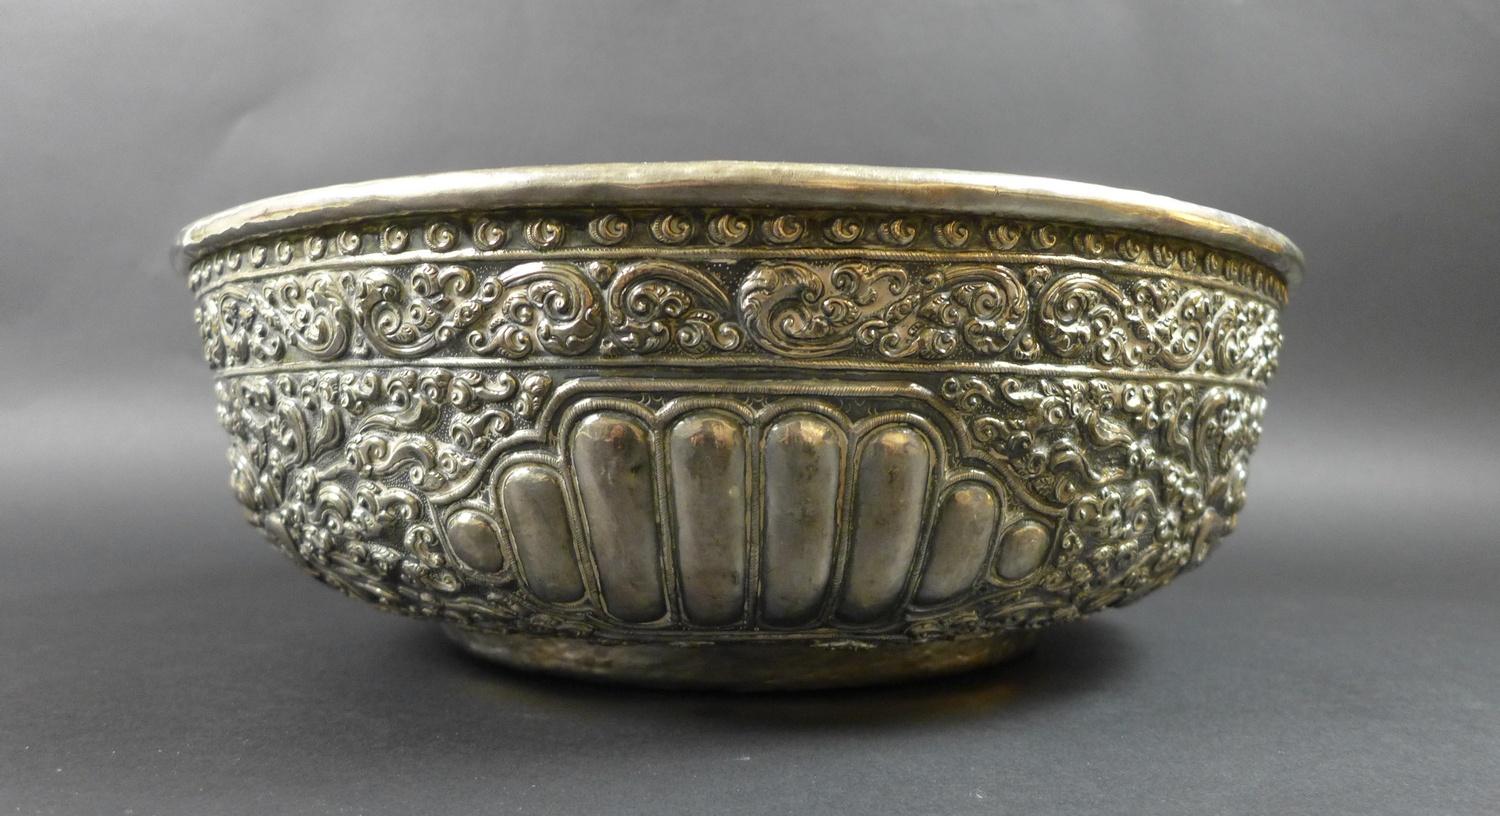 A late 19th century Thai silver large bowl, repousse decorated in relief with three face masks and - Image 4 of 10